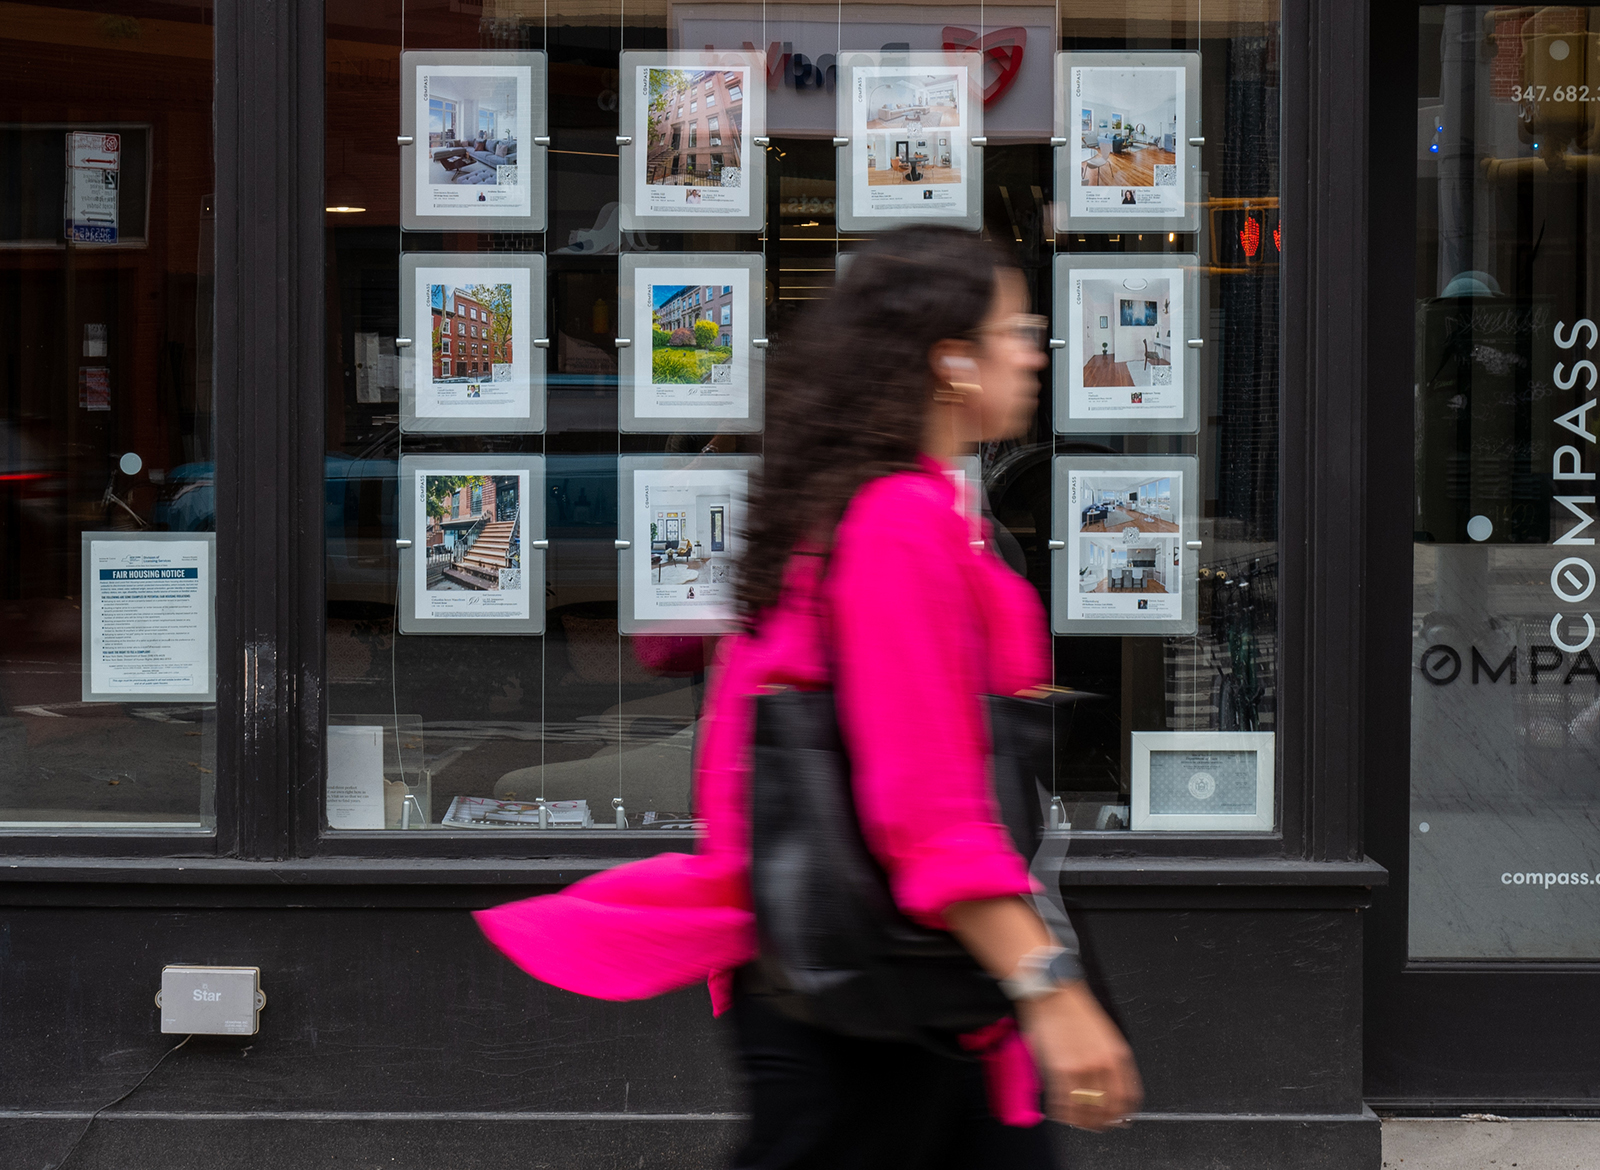 Rental apartments are displayed in a realtor's office window on July 26, 2022 in the Brooklyn borough of New York City. 